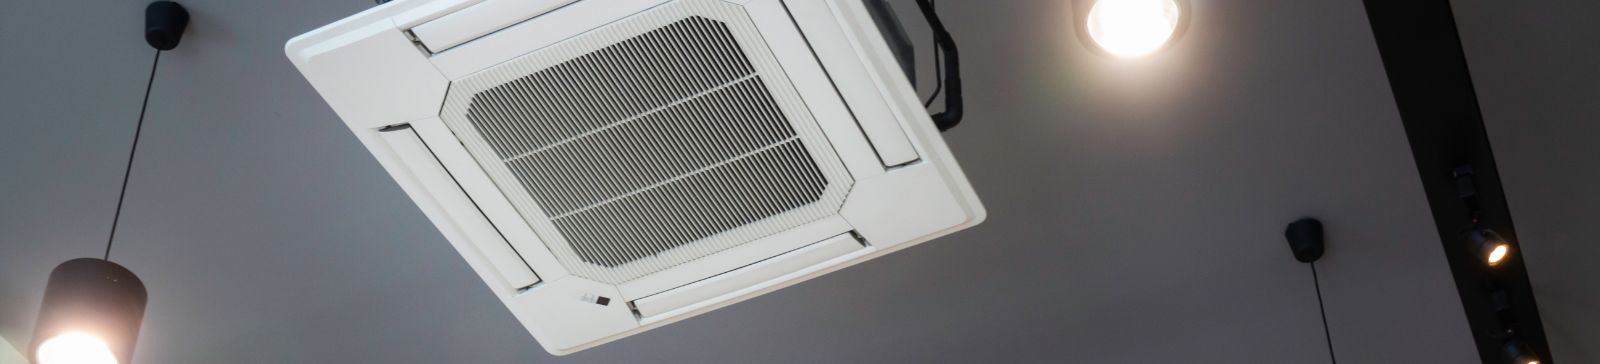 A close look at air conditioning vent on the ceiling